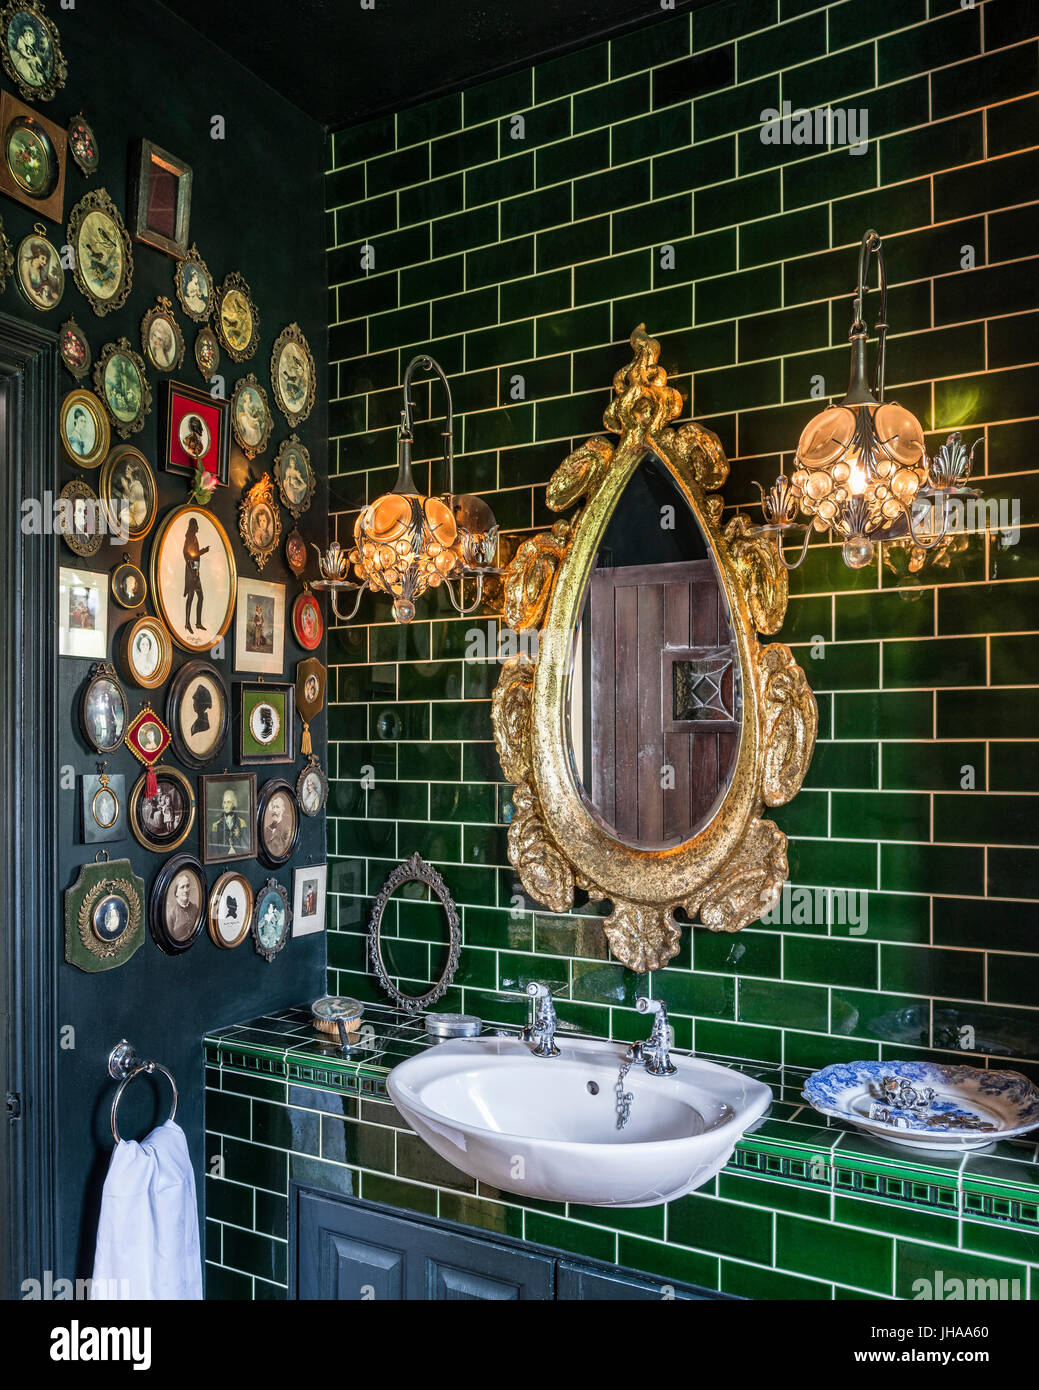 Gold mirror over washbasin with green tiles Stock Photo